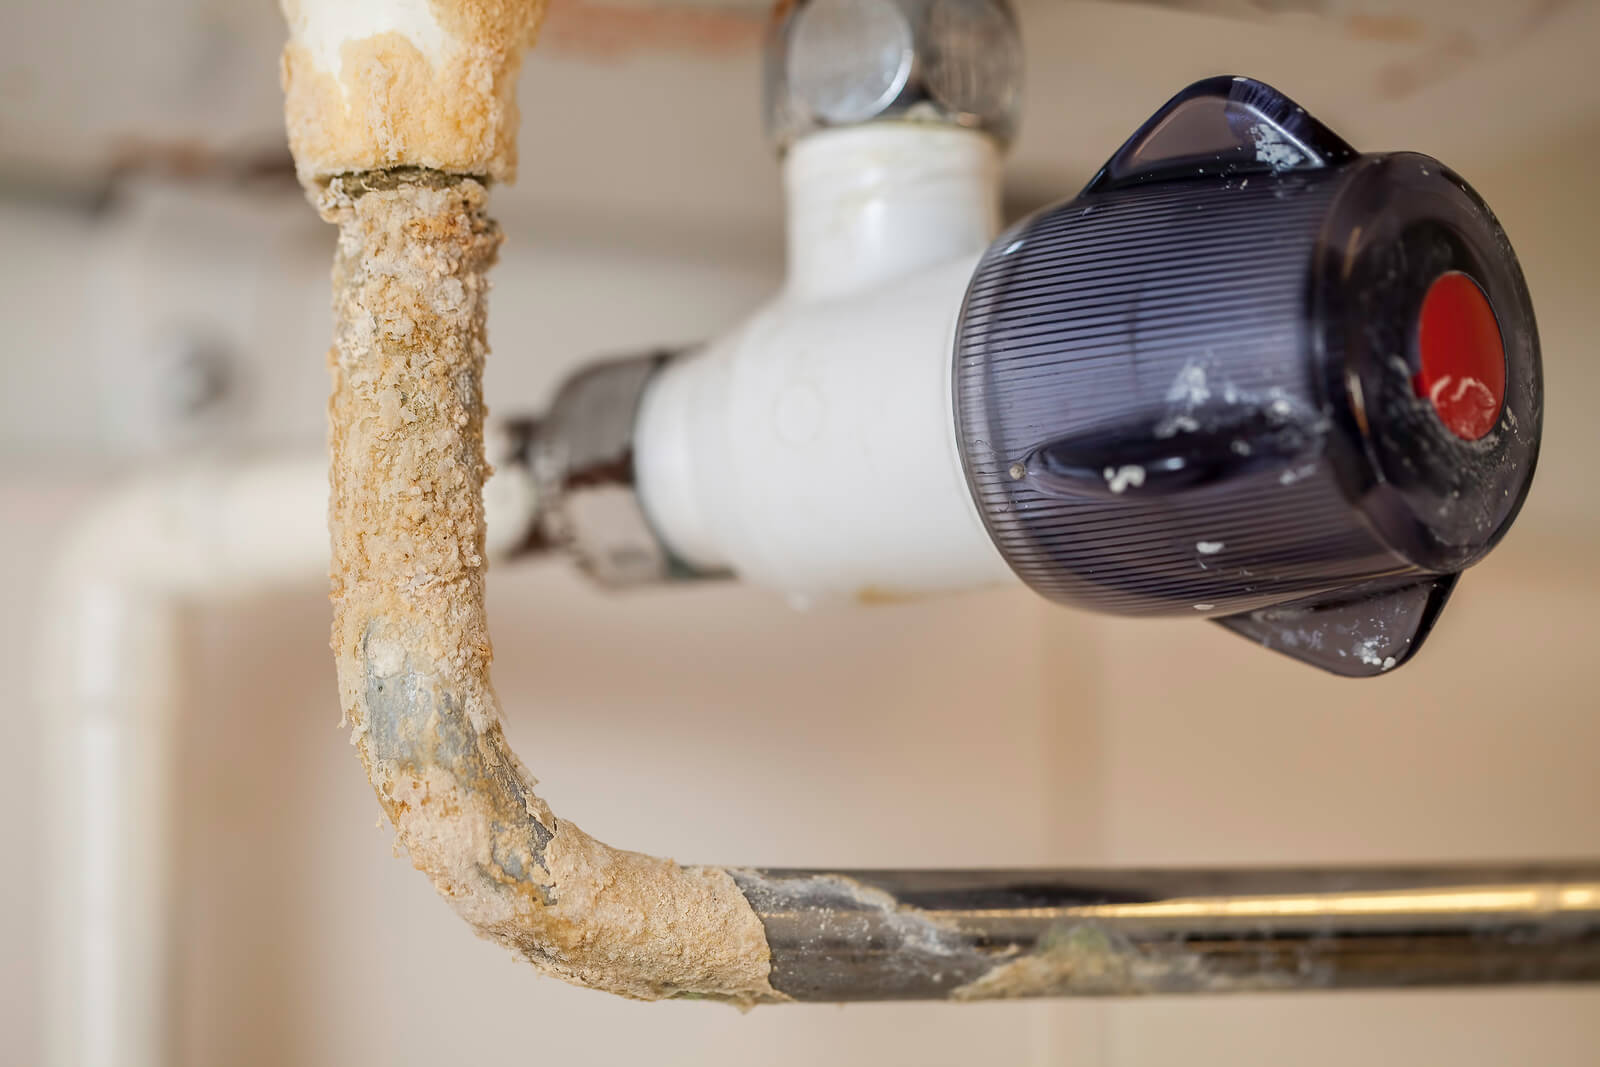 https://www.waldmanplumbing.com/wp-content/uploads/2020/06/What-to-Do-About-Calcium-Buildup-in-Your-Plumbing-System.jpg